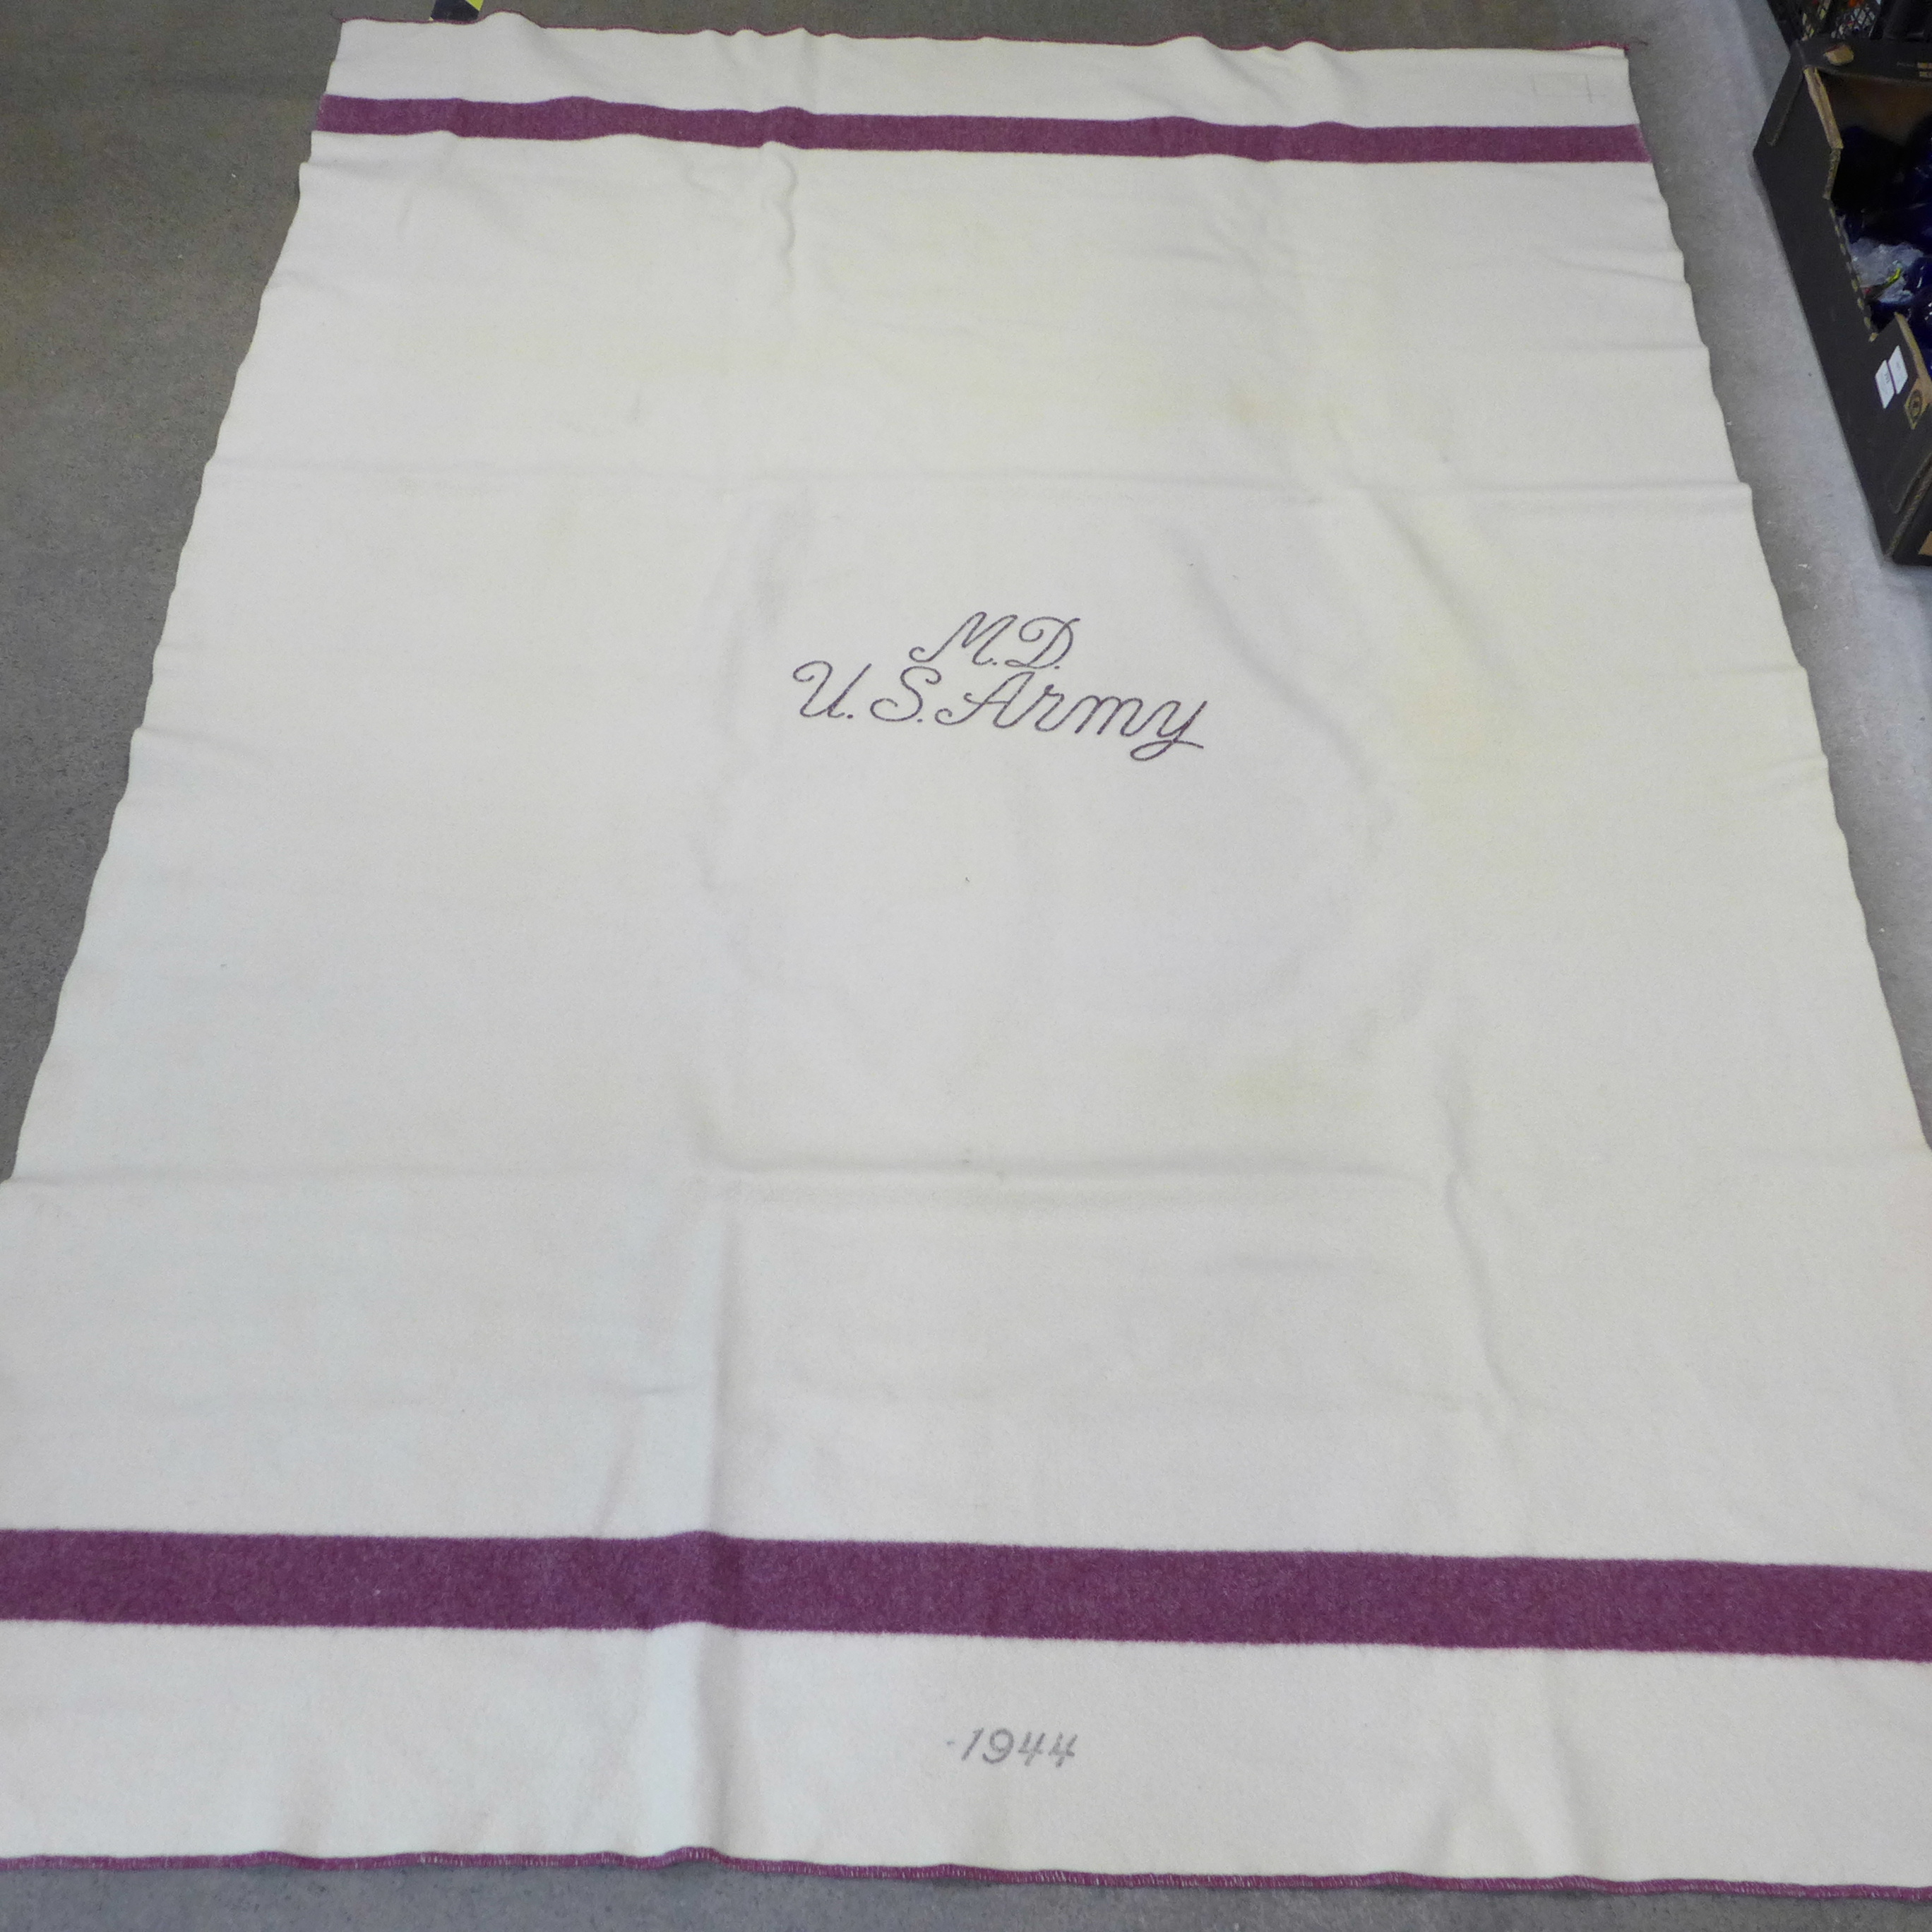 A U.S. Army Medical Department blanket, marked 1944